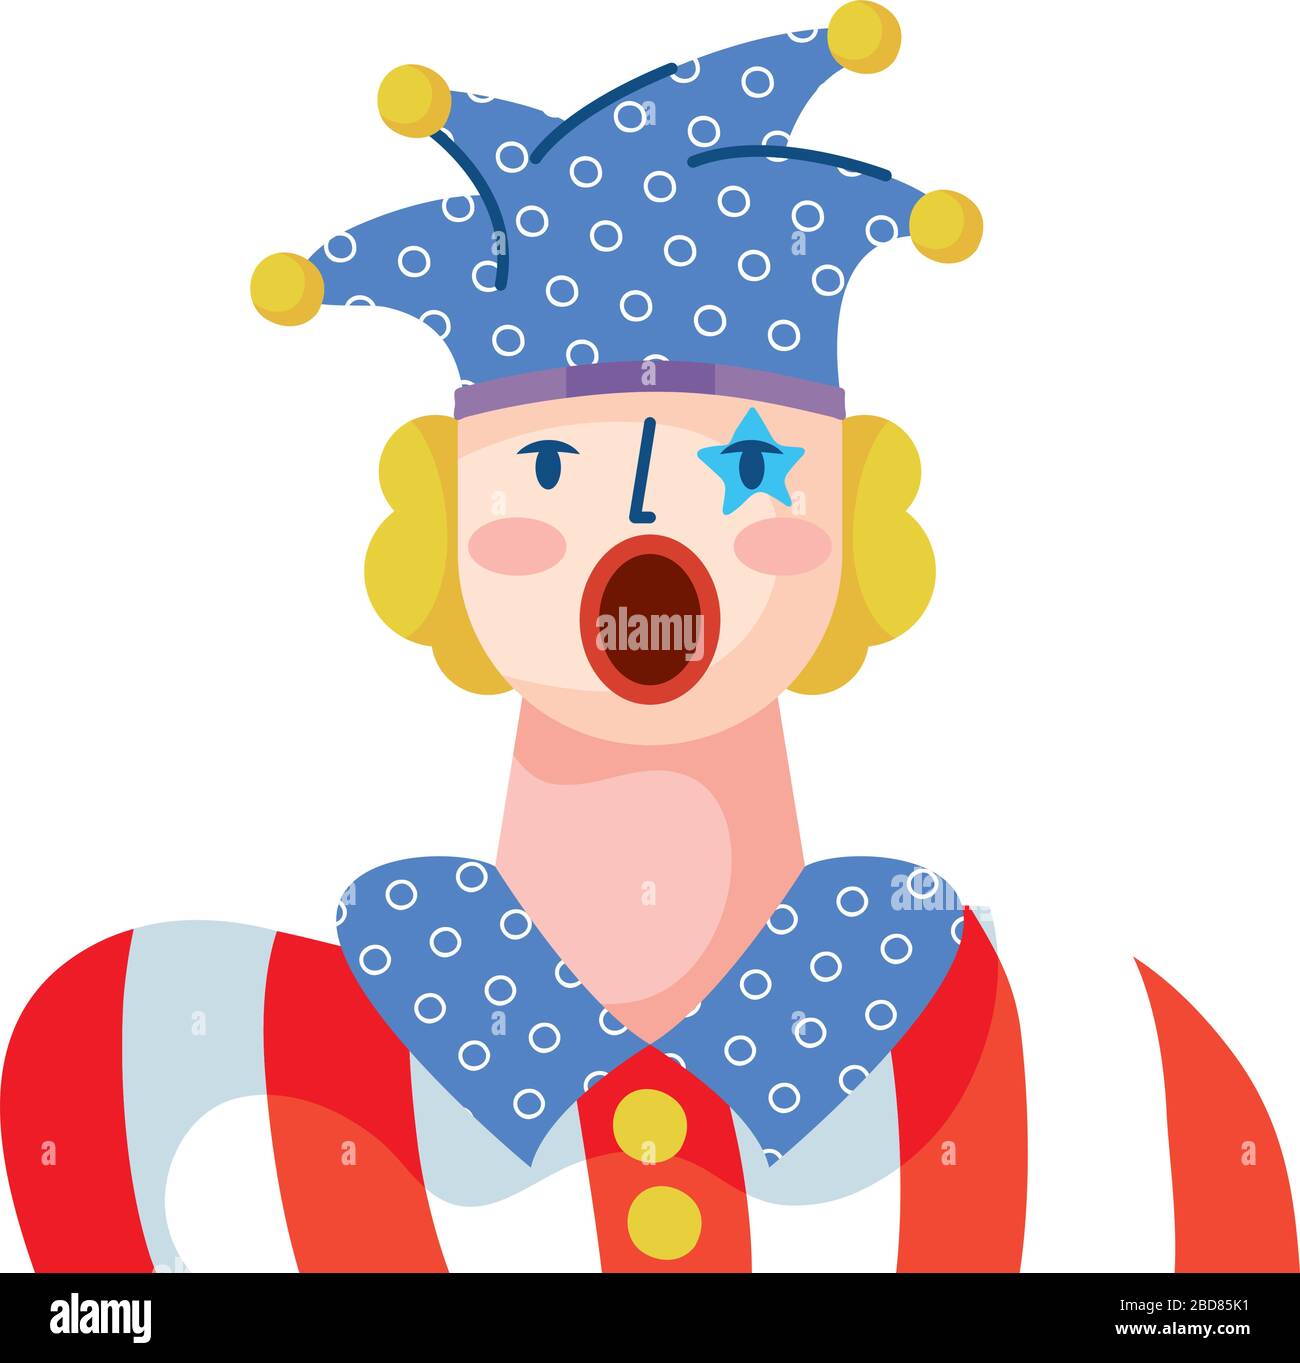 clown funny hand draw style Stock Vector